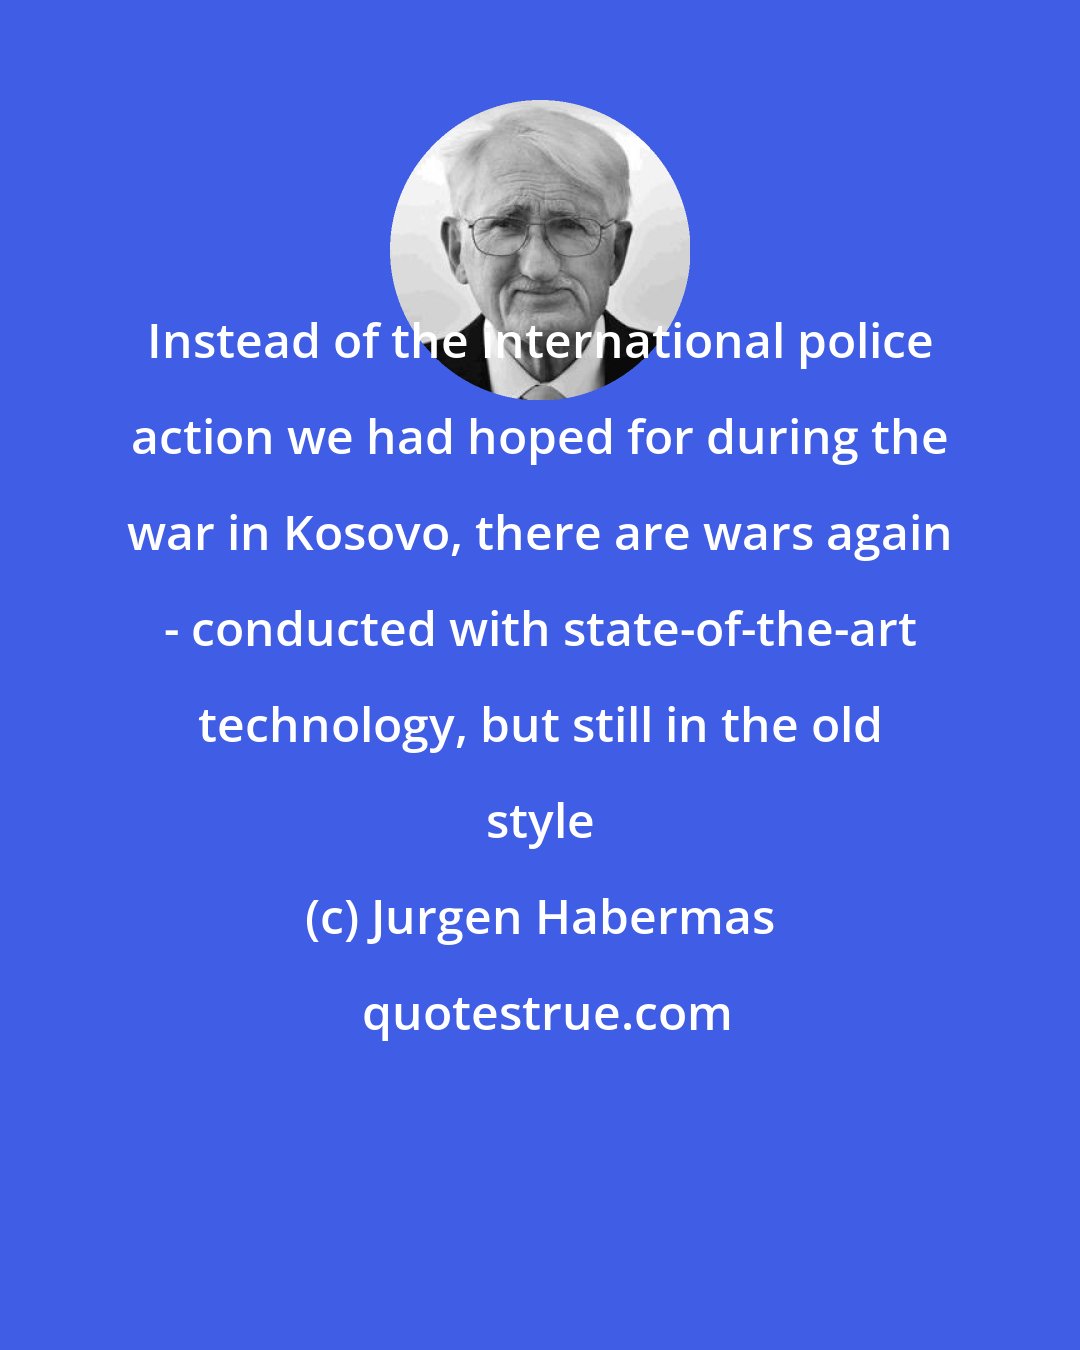 Jurgen Habermas: Instead of the international police action we had hoped for during the war in Kosovo, there are wars again - conducted with state-of-the-art technology, but still in the old style